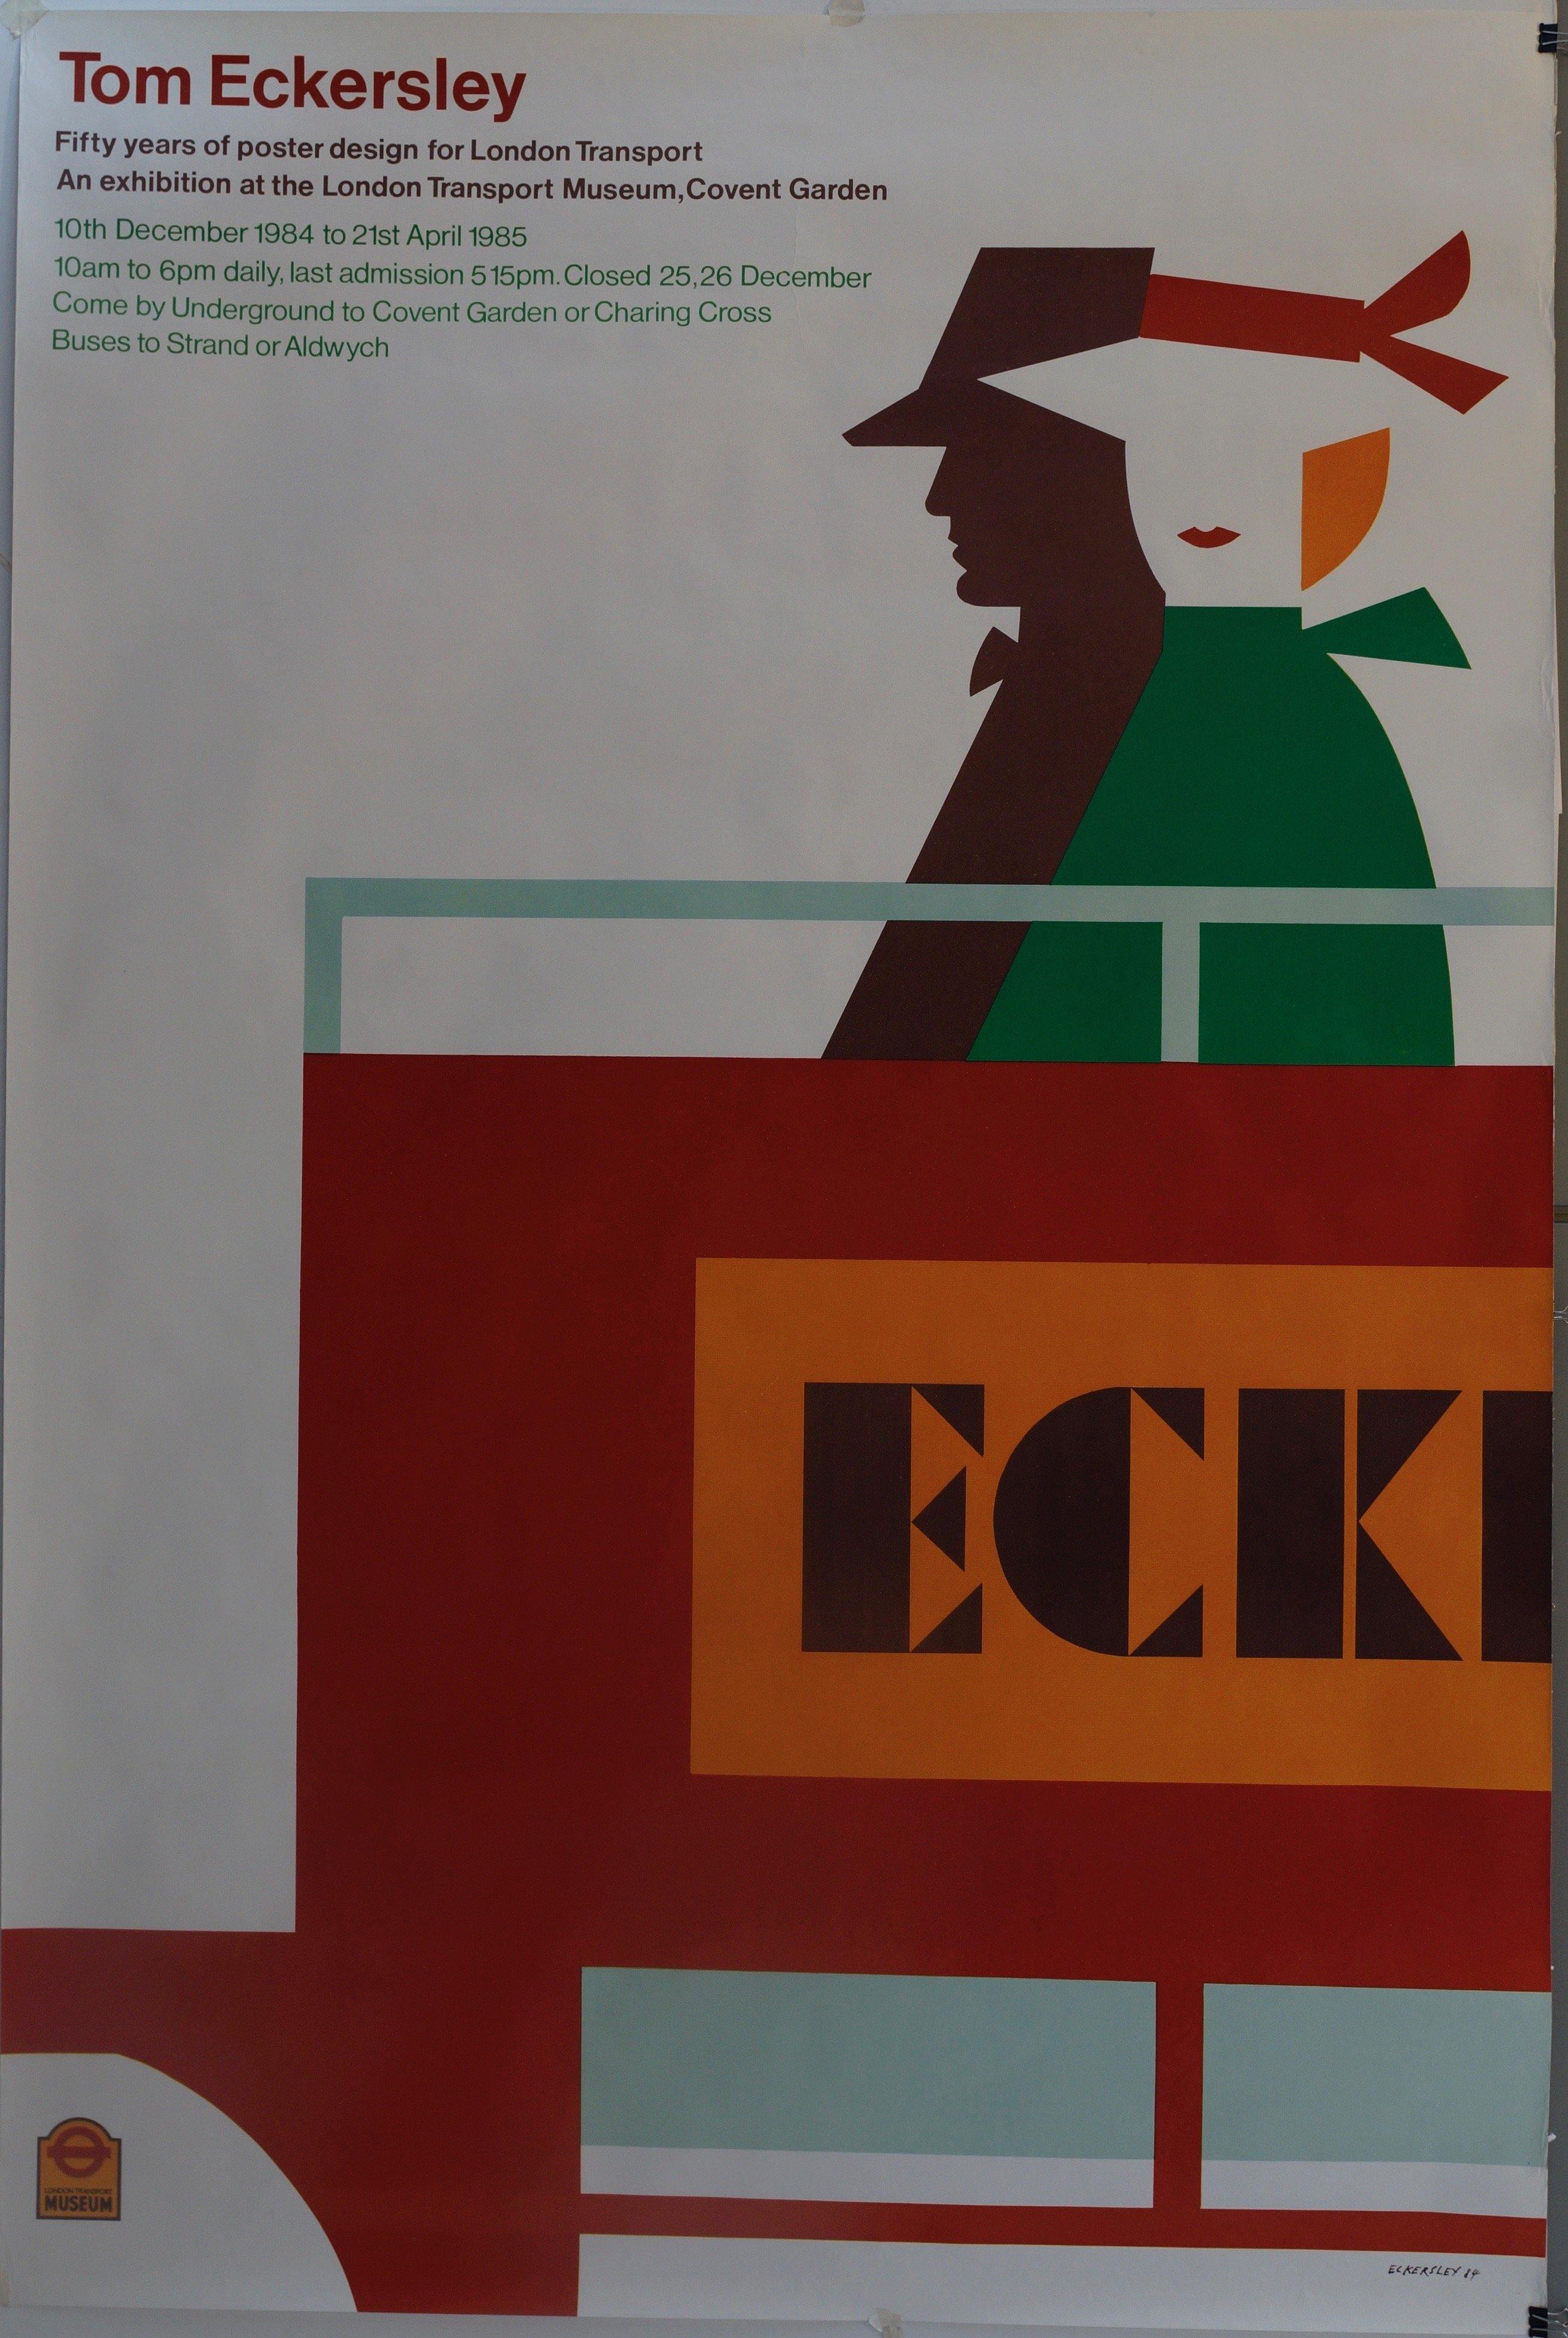 Tom Eckersley "Fifty years of poster design for Transport" – Poster Museum